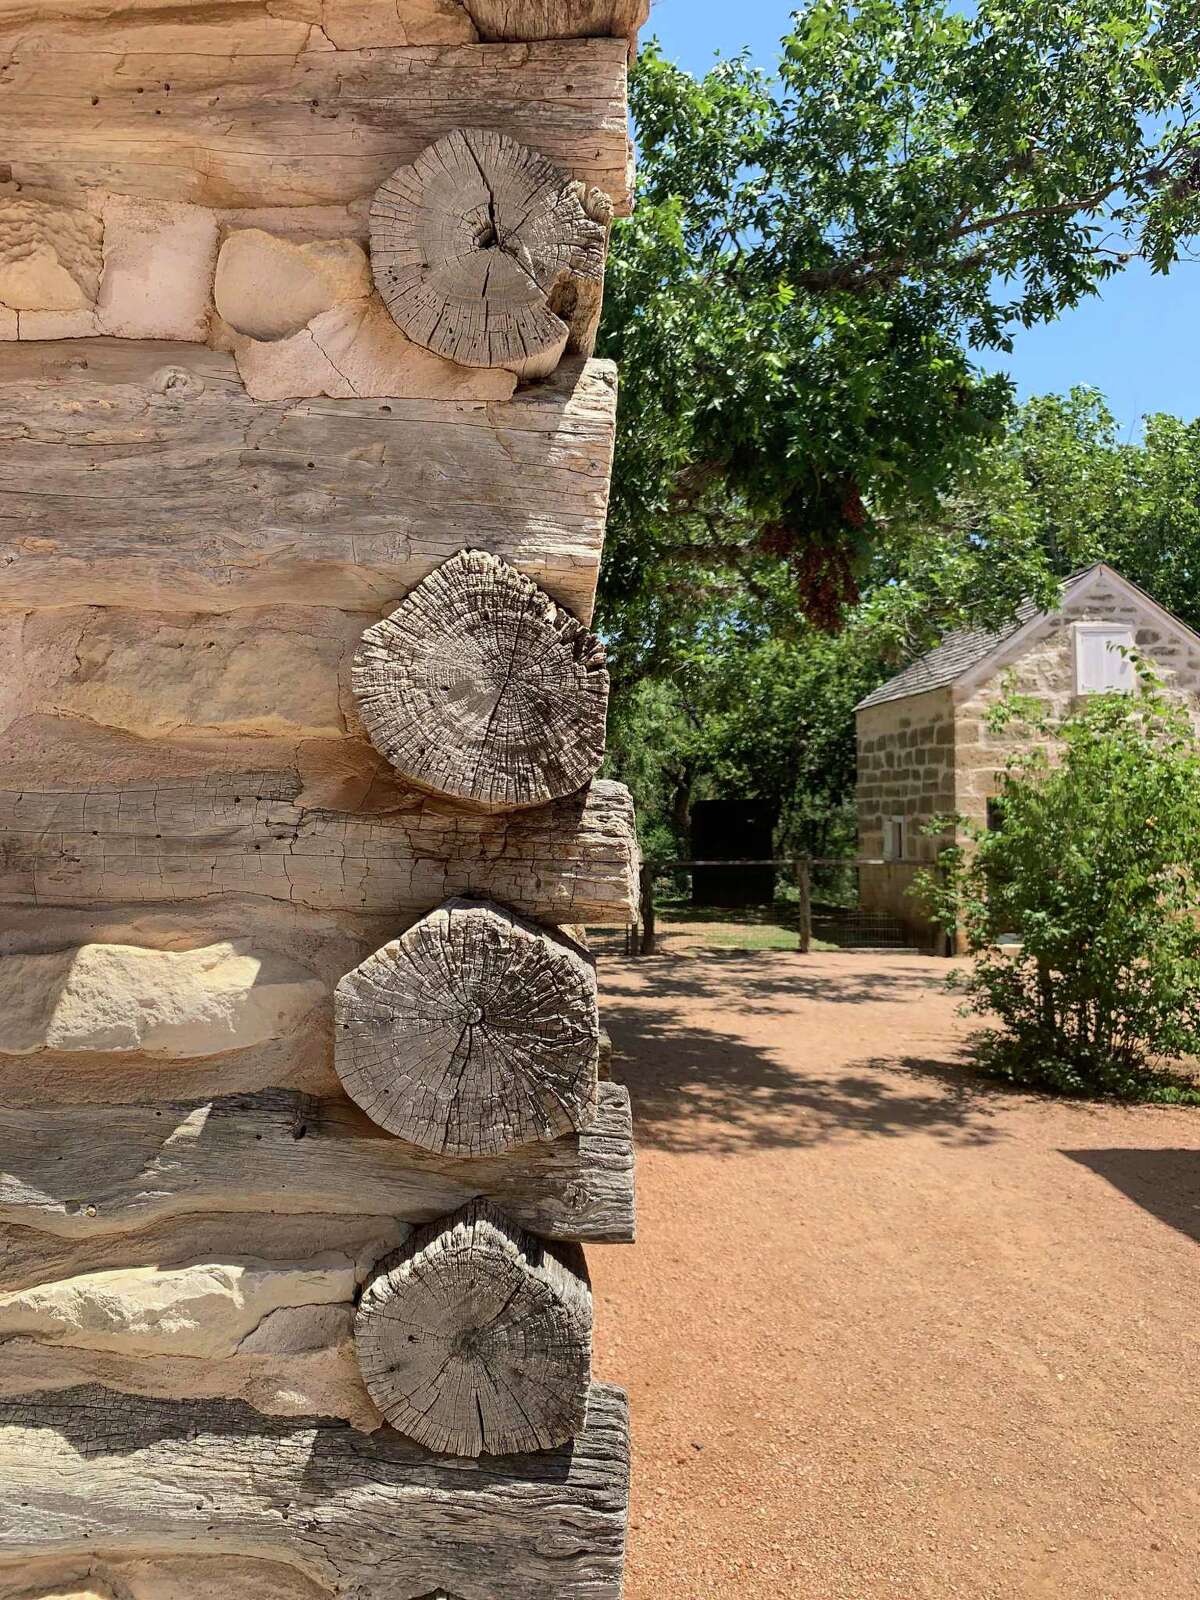 Most vernacular buildings were not designed by an architect and instead were built following local traditions, like the saddle notching of the Sauer-Beckmann Farm Farm, located in the Lyndon B. Johnson State Park & Historic Site in Gillespie County.